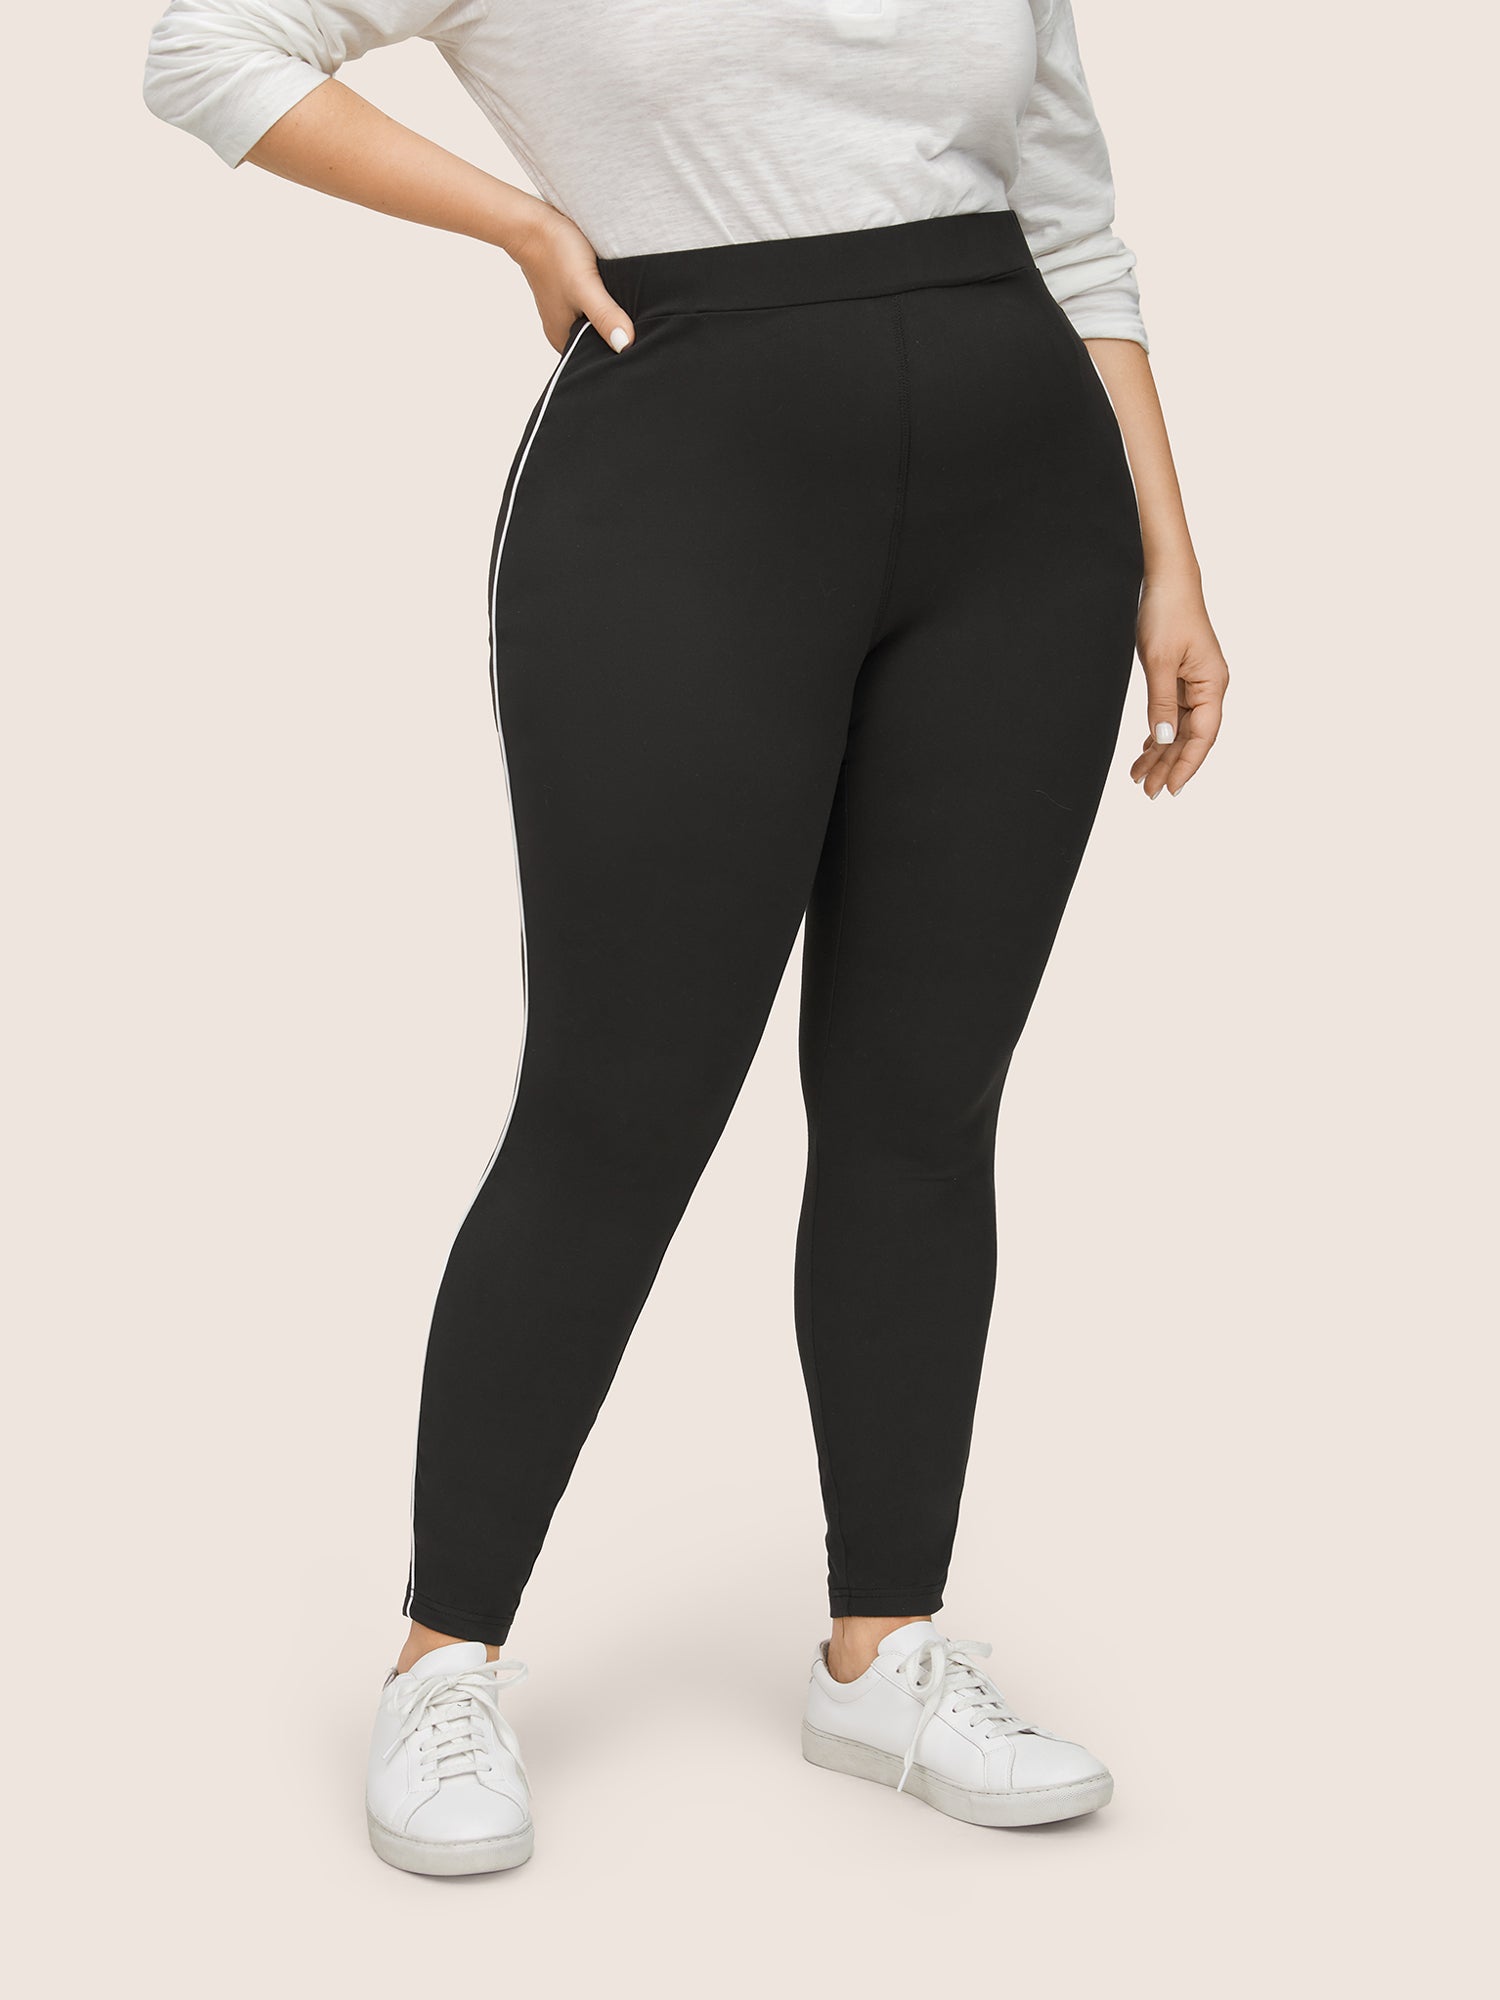 

Plus Size Women Everyday Plain Non High stretch Skinny High Rise Casual Leggings BloomChic, Black